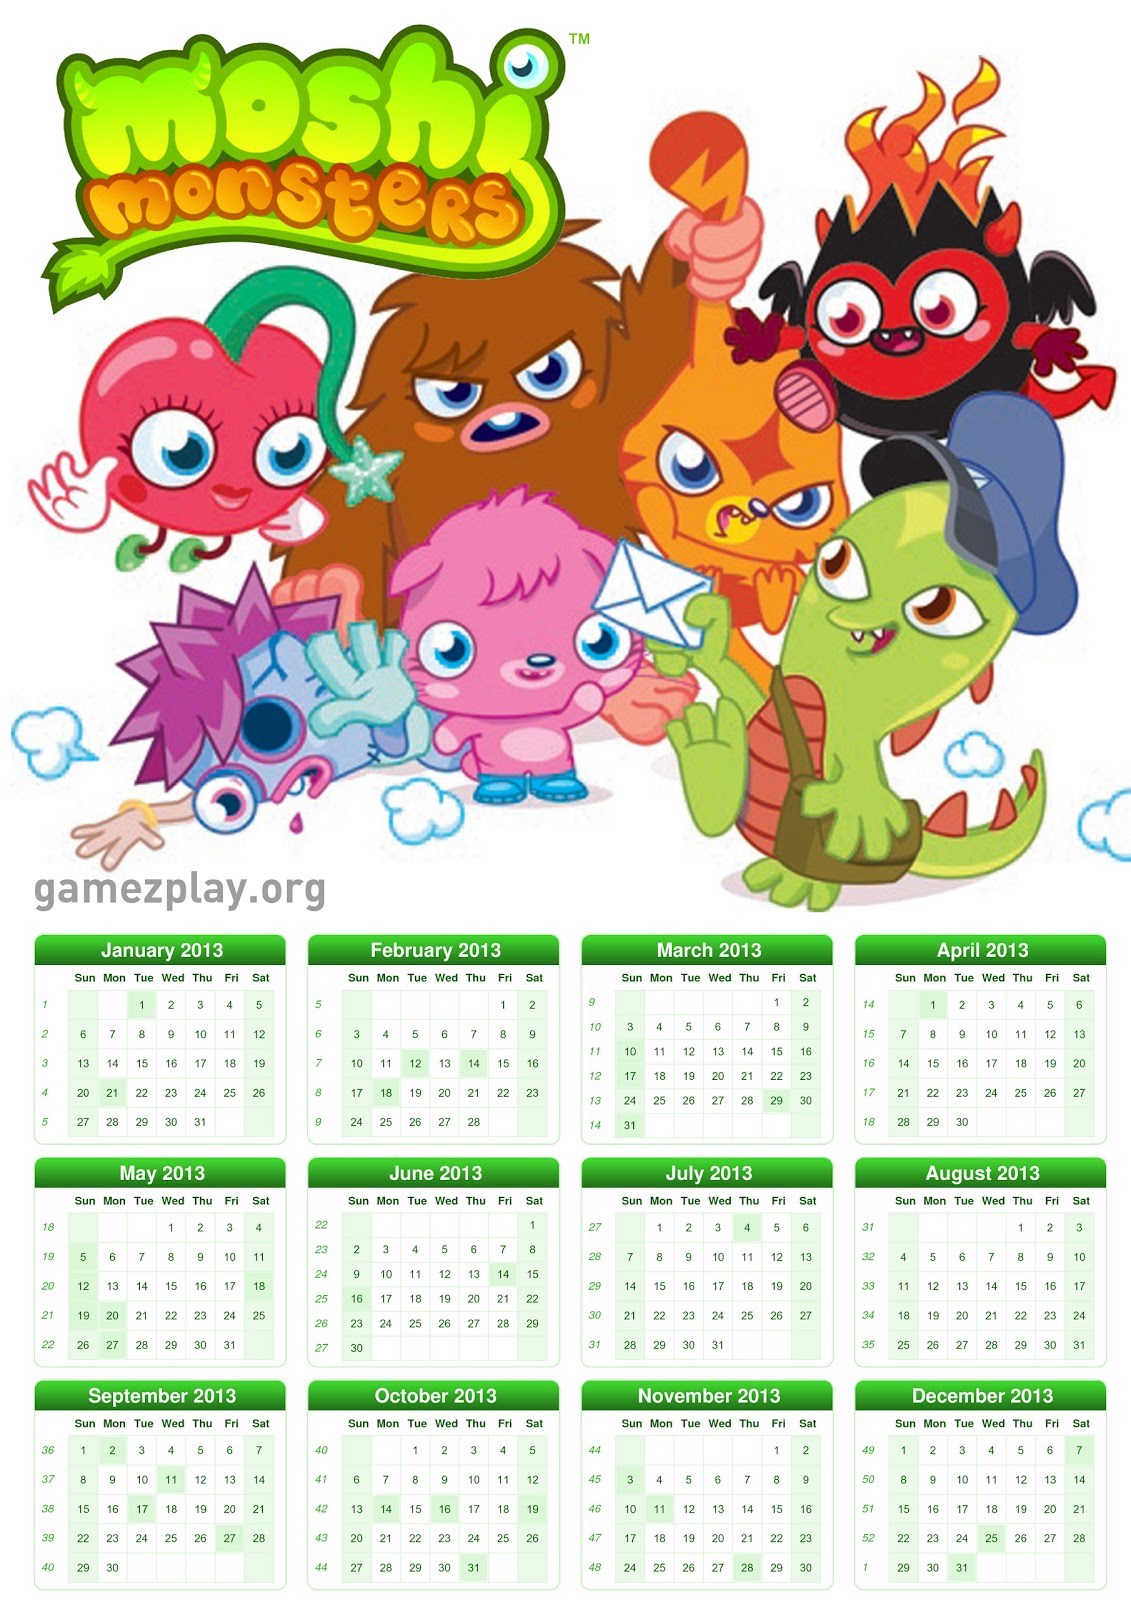 moshi monster 2013 calendar right click to download 3 7mb free moshi